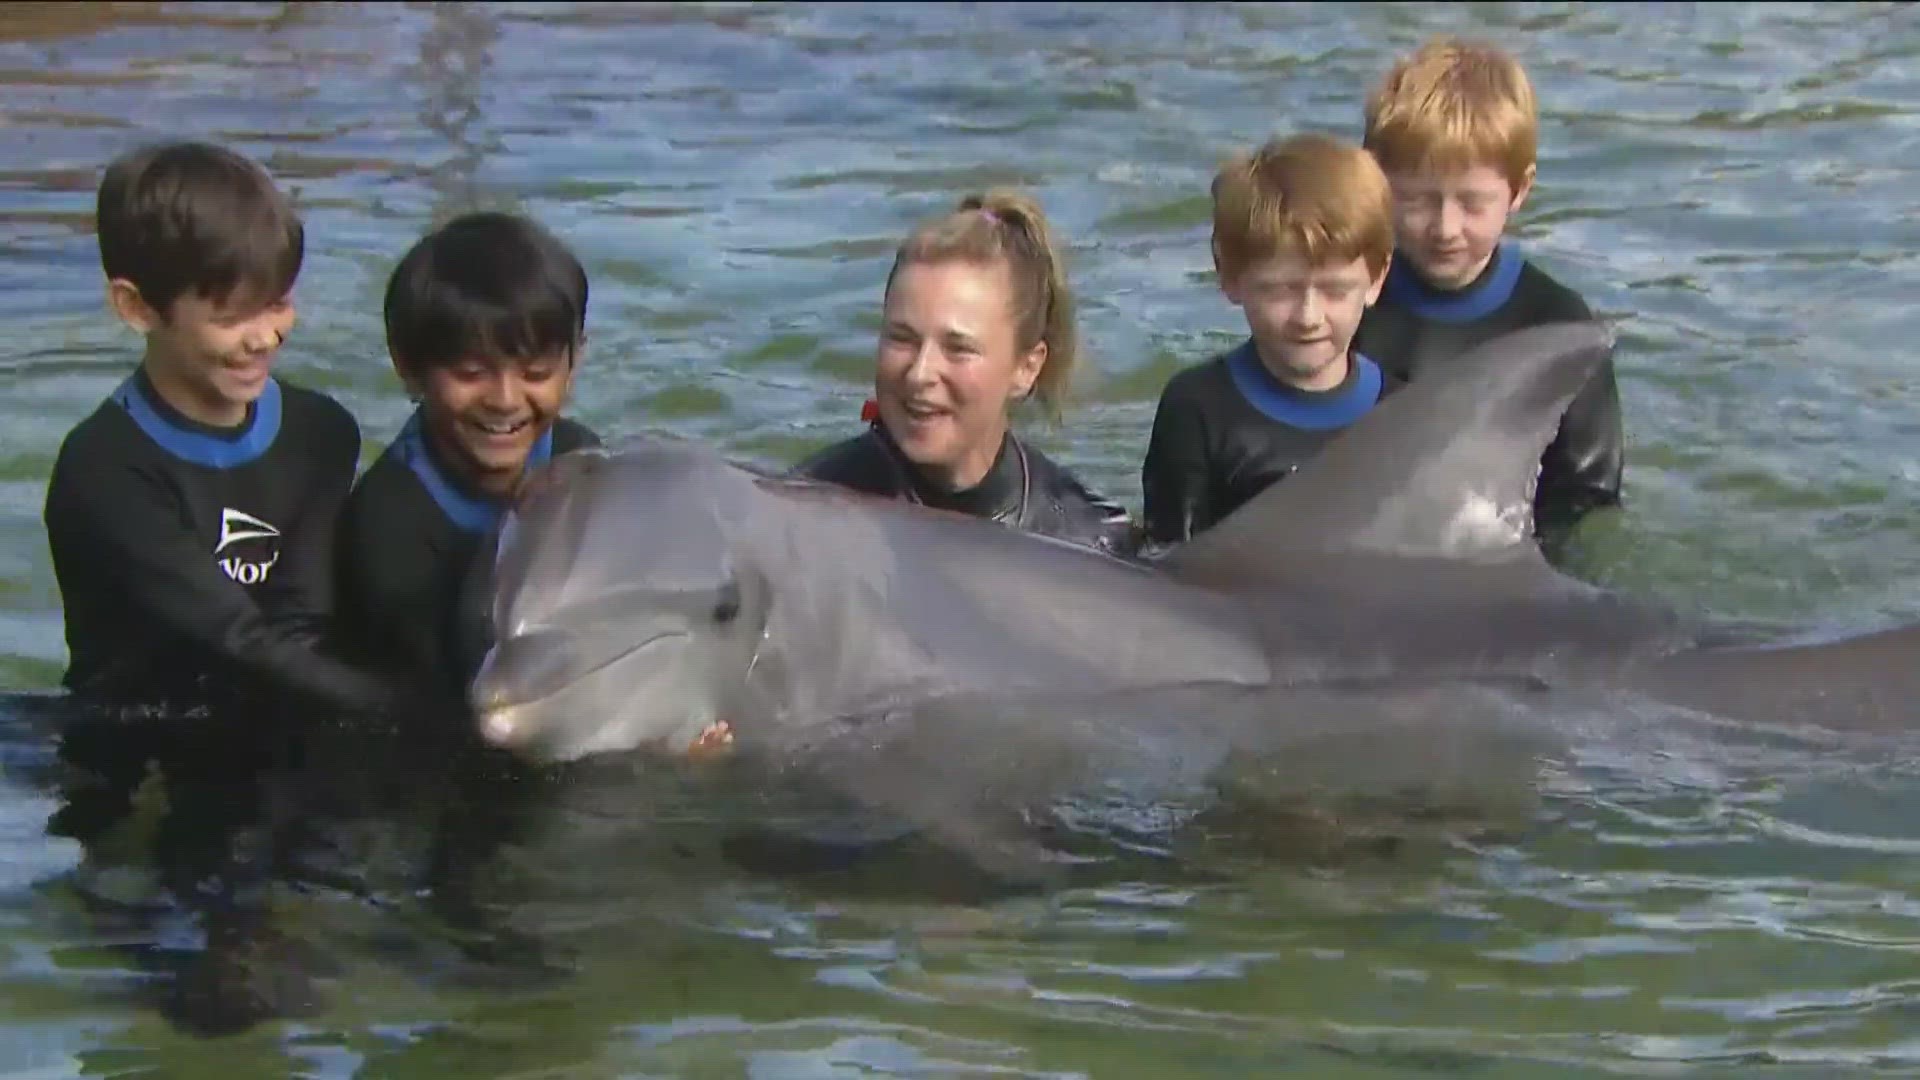 Sea World and Rady Children's worked to give child patients a chance to swim with the dolphins and enjoy the park.